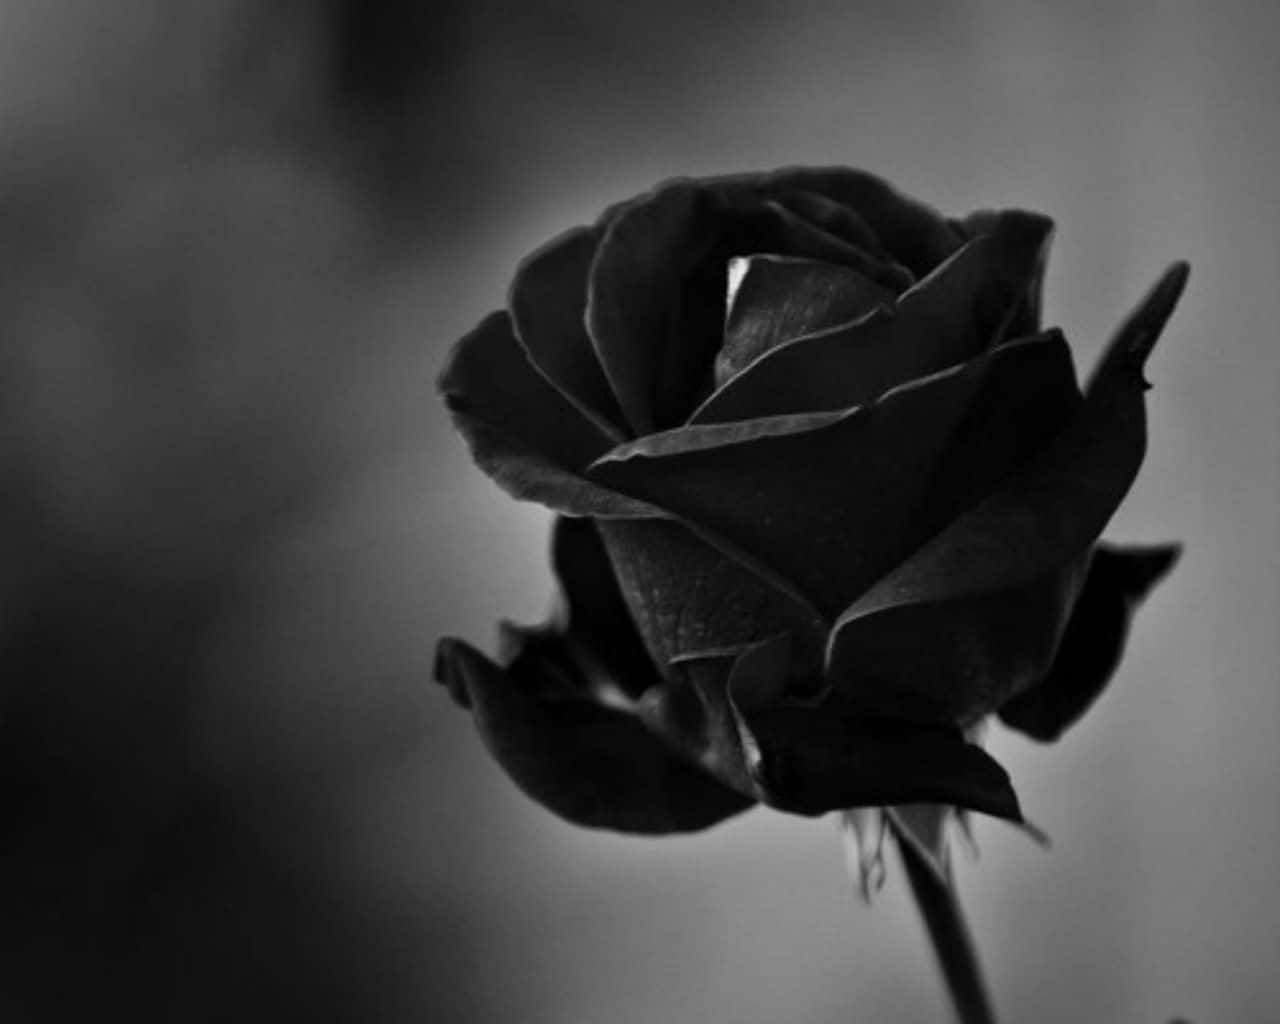 "The Mysterious Black Rose - A Symbol Of Tragedy"